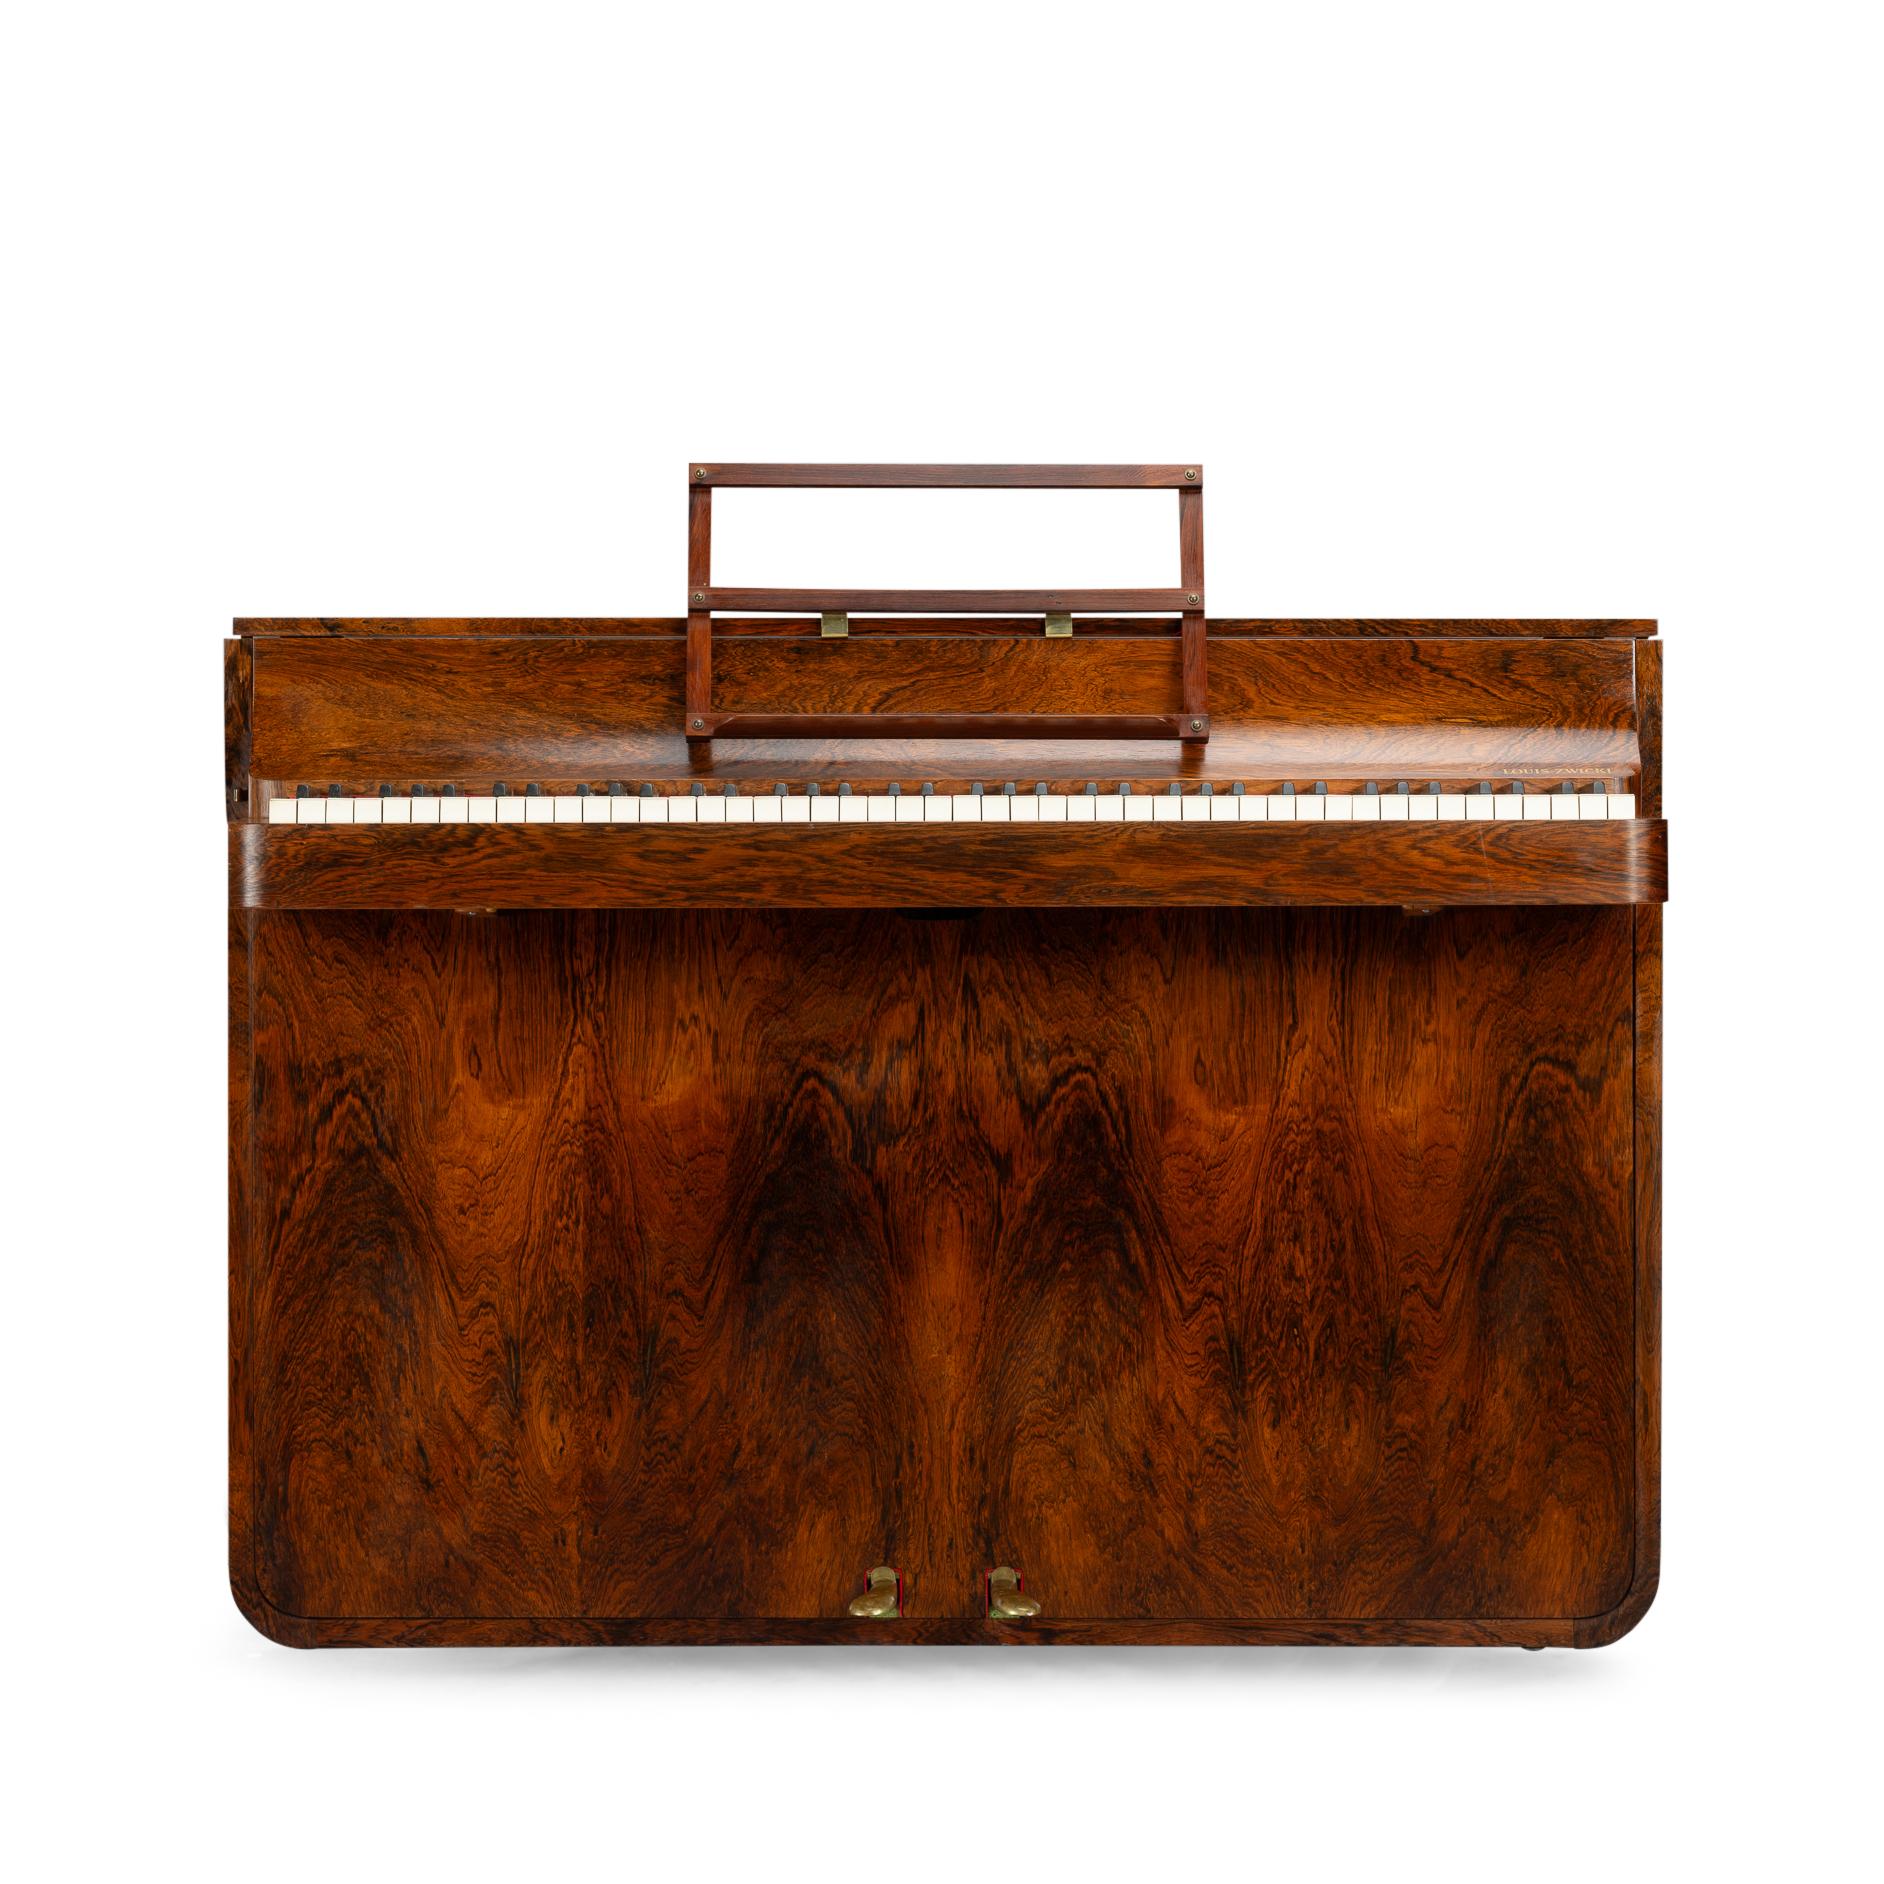 Danish Design Midcentury Rosewood Pianette by Louis Zwicki, 1950s For Sale 1